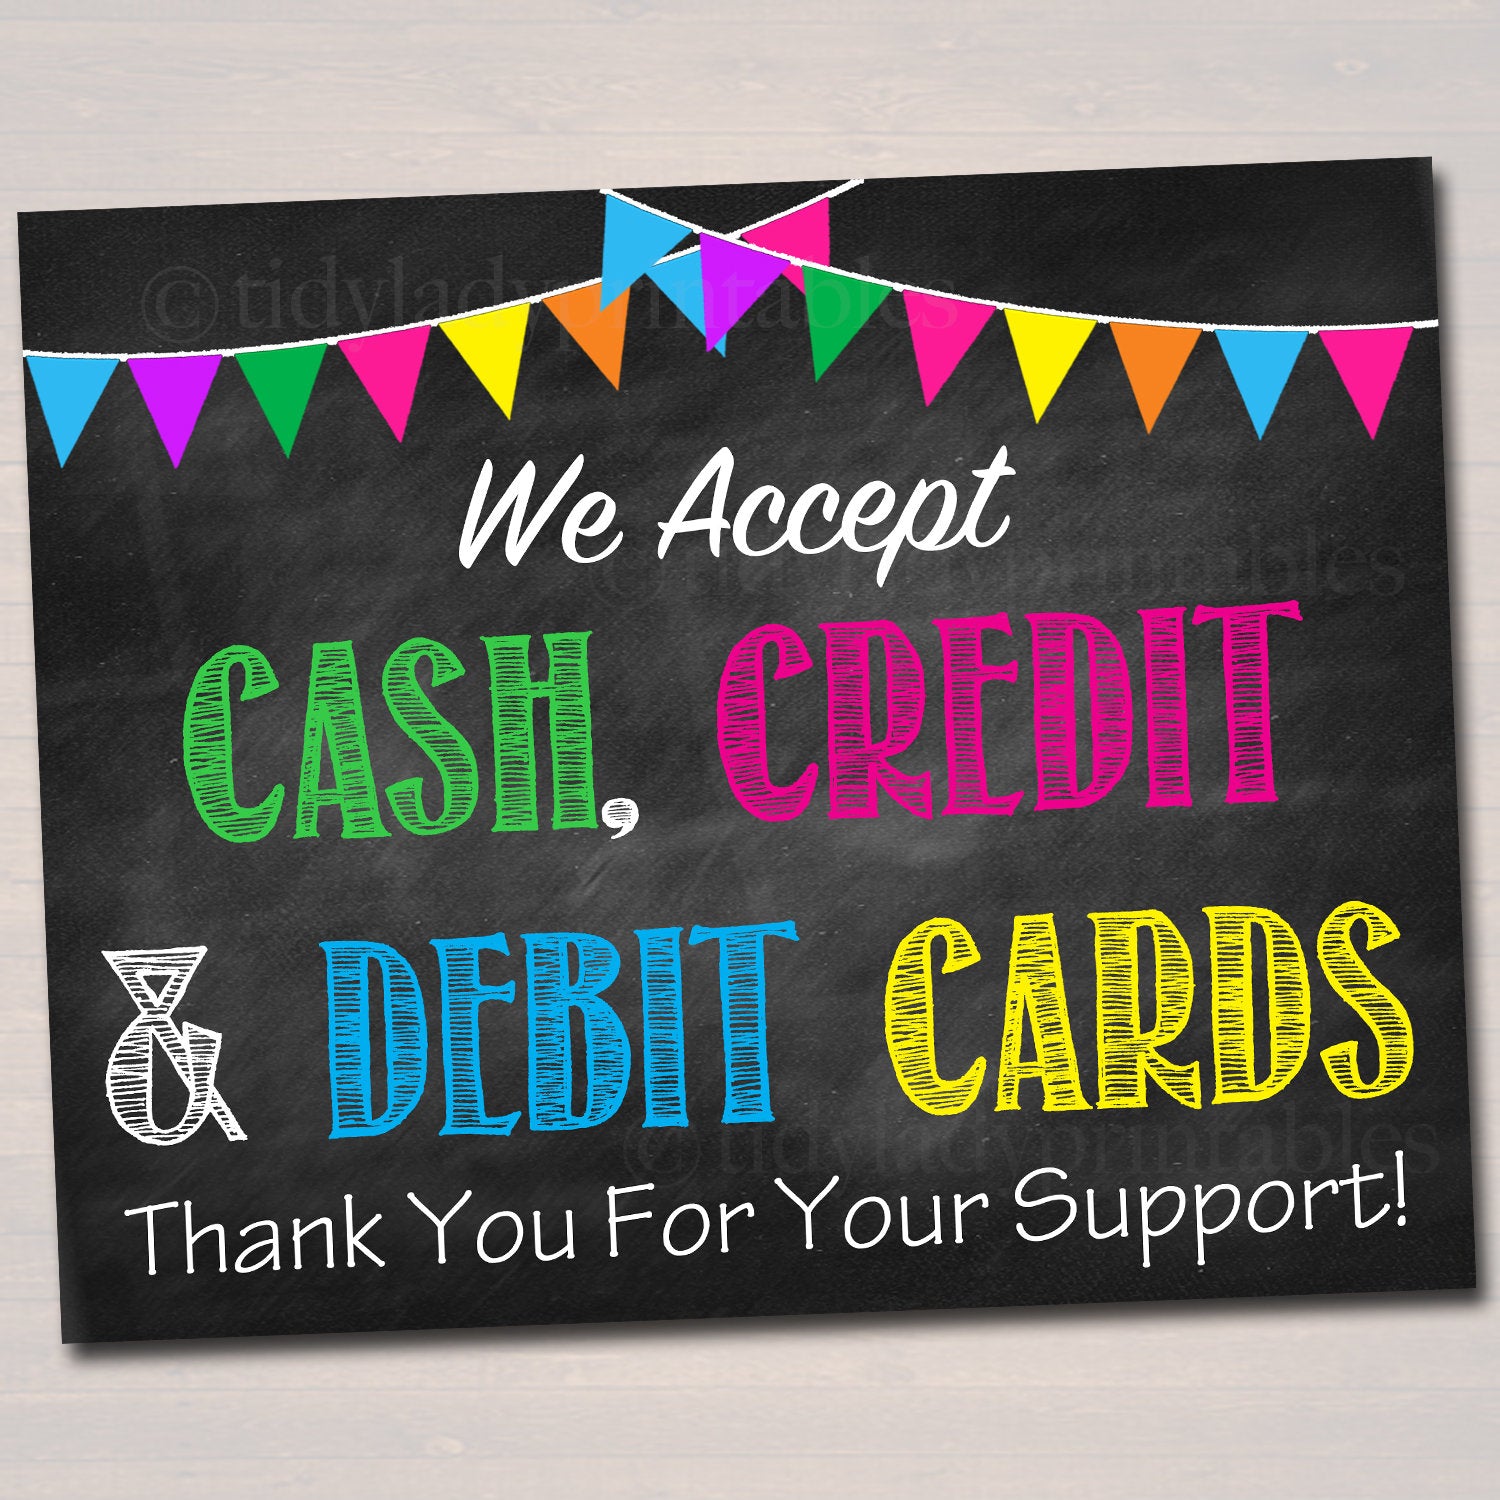 credit cards accepted sign